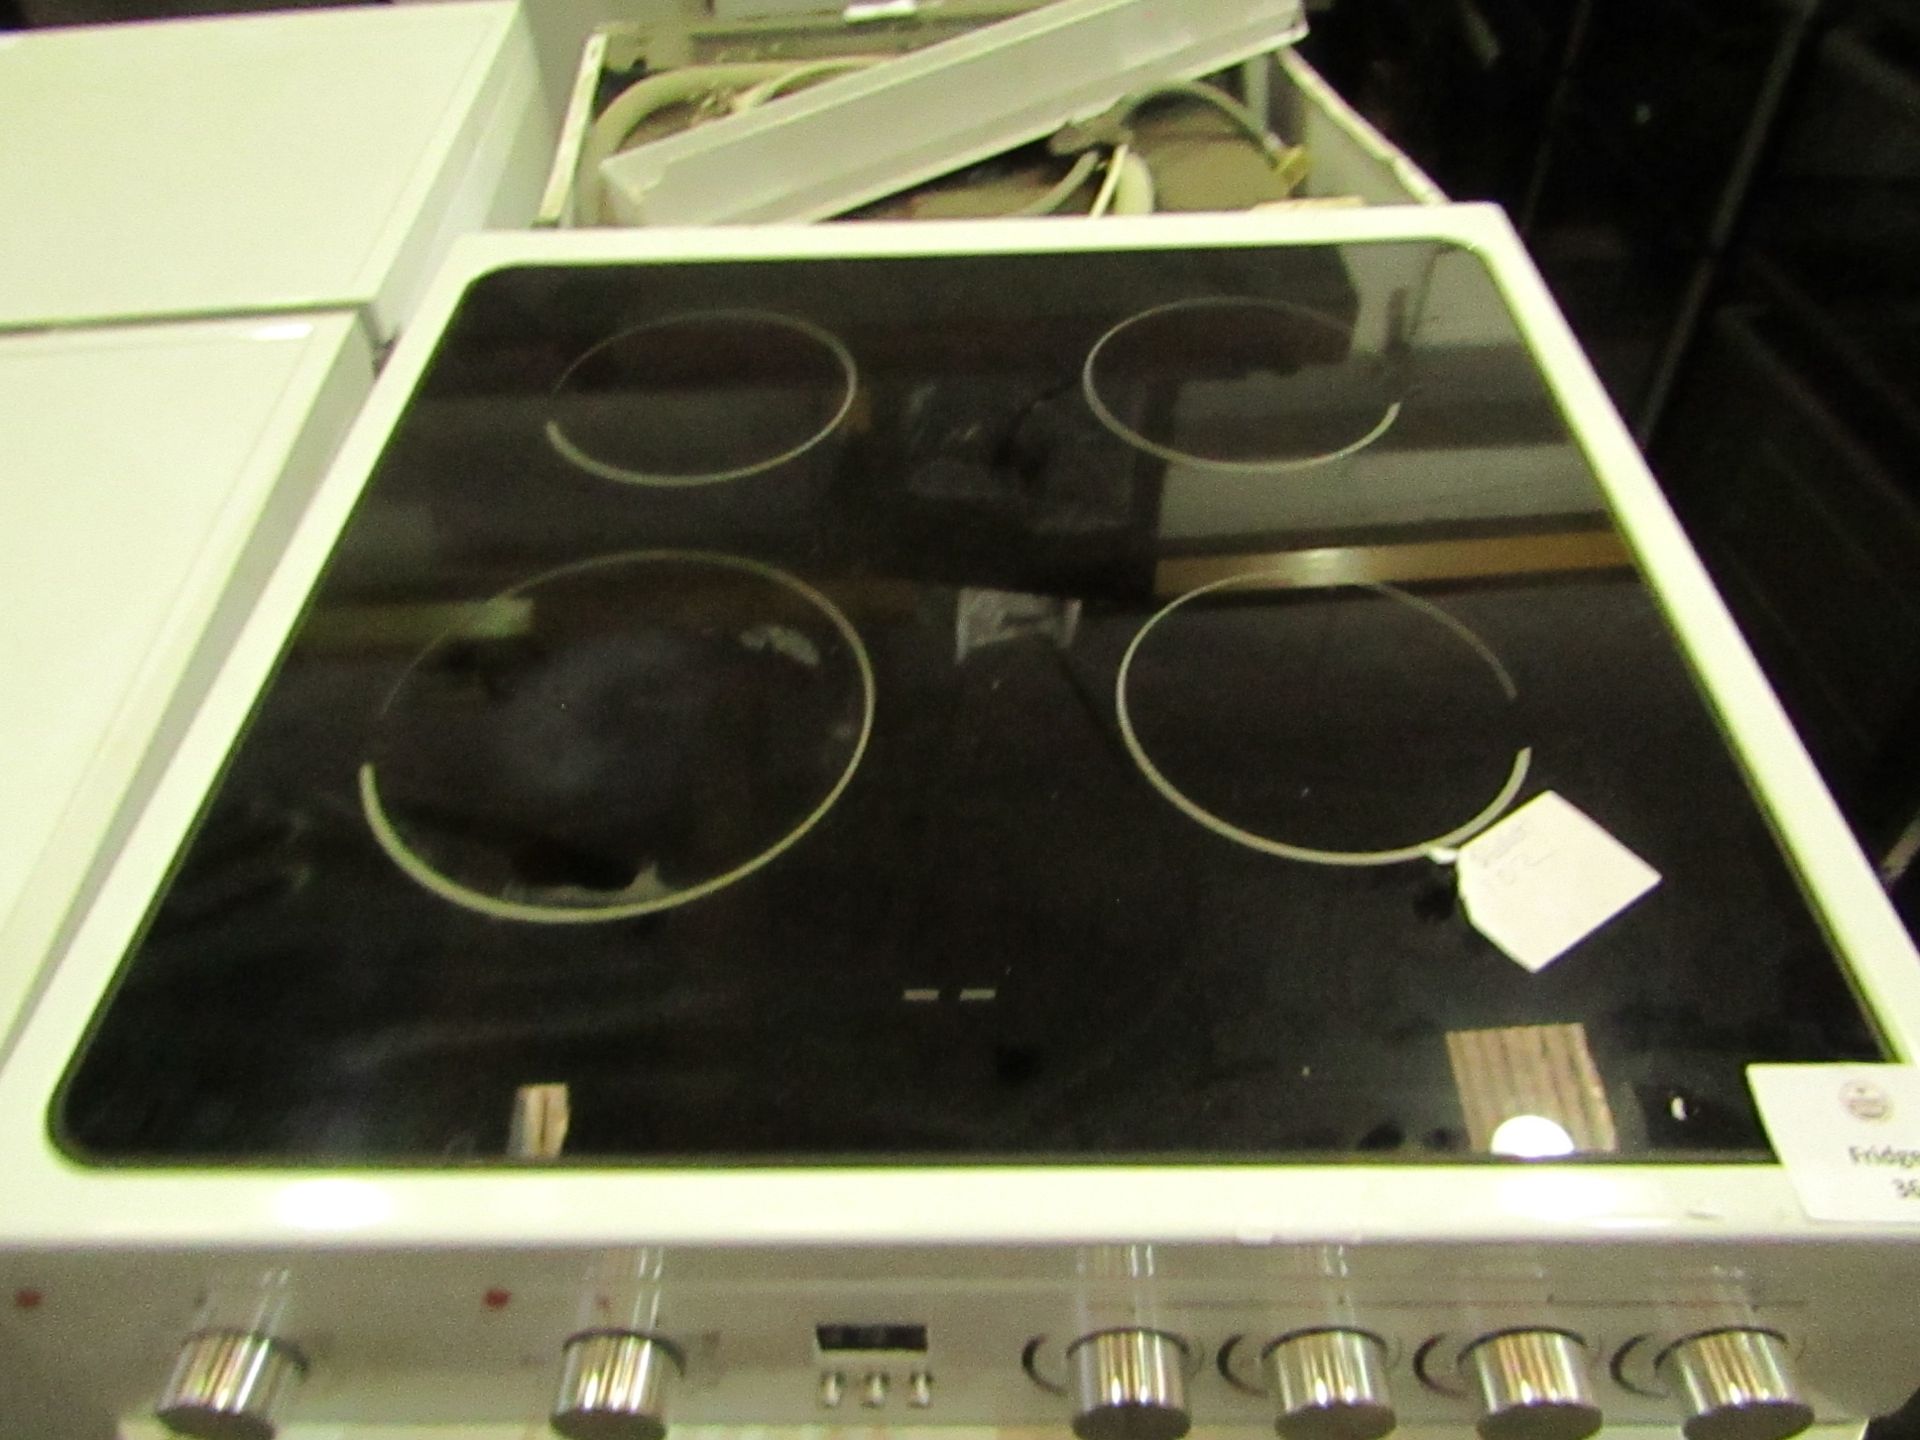 Hisense Double oven with ceramic hob, This item looks to be in good condition and appears ready - Image 2 of 4